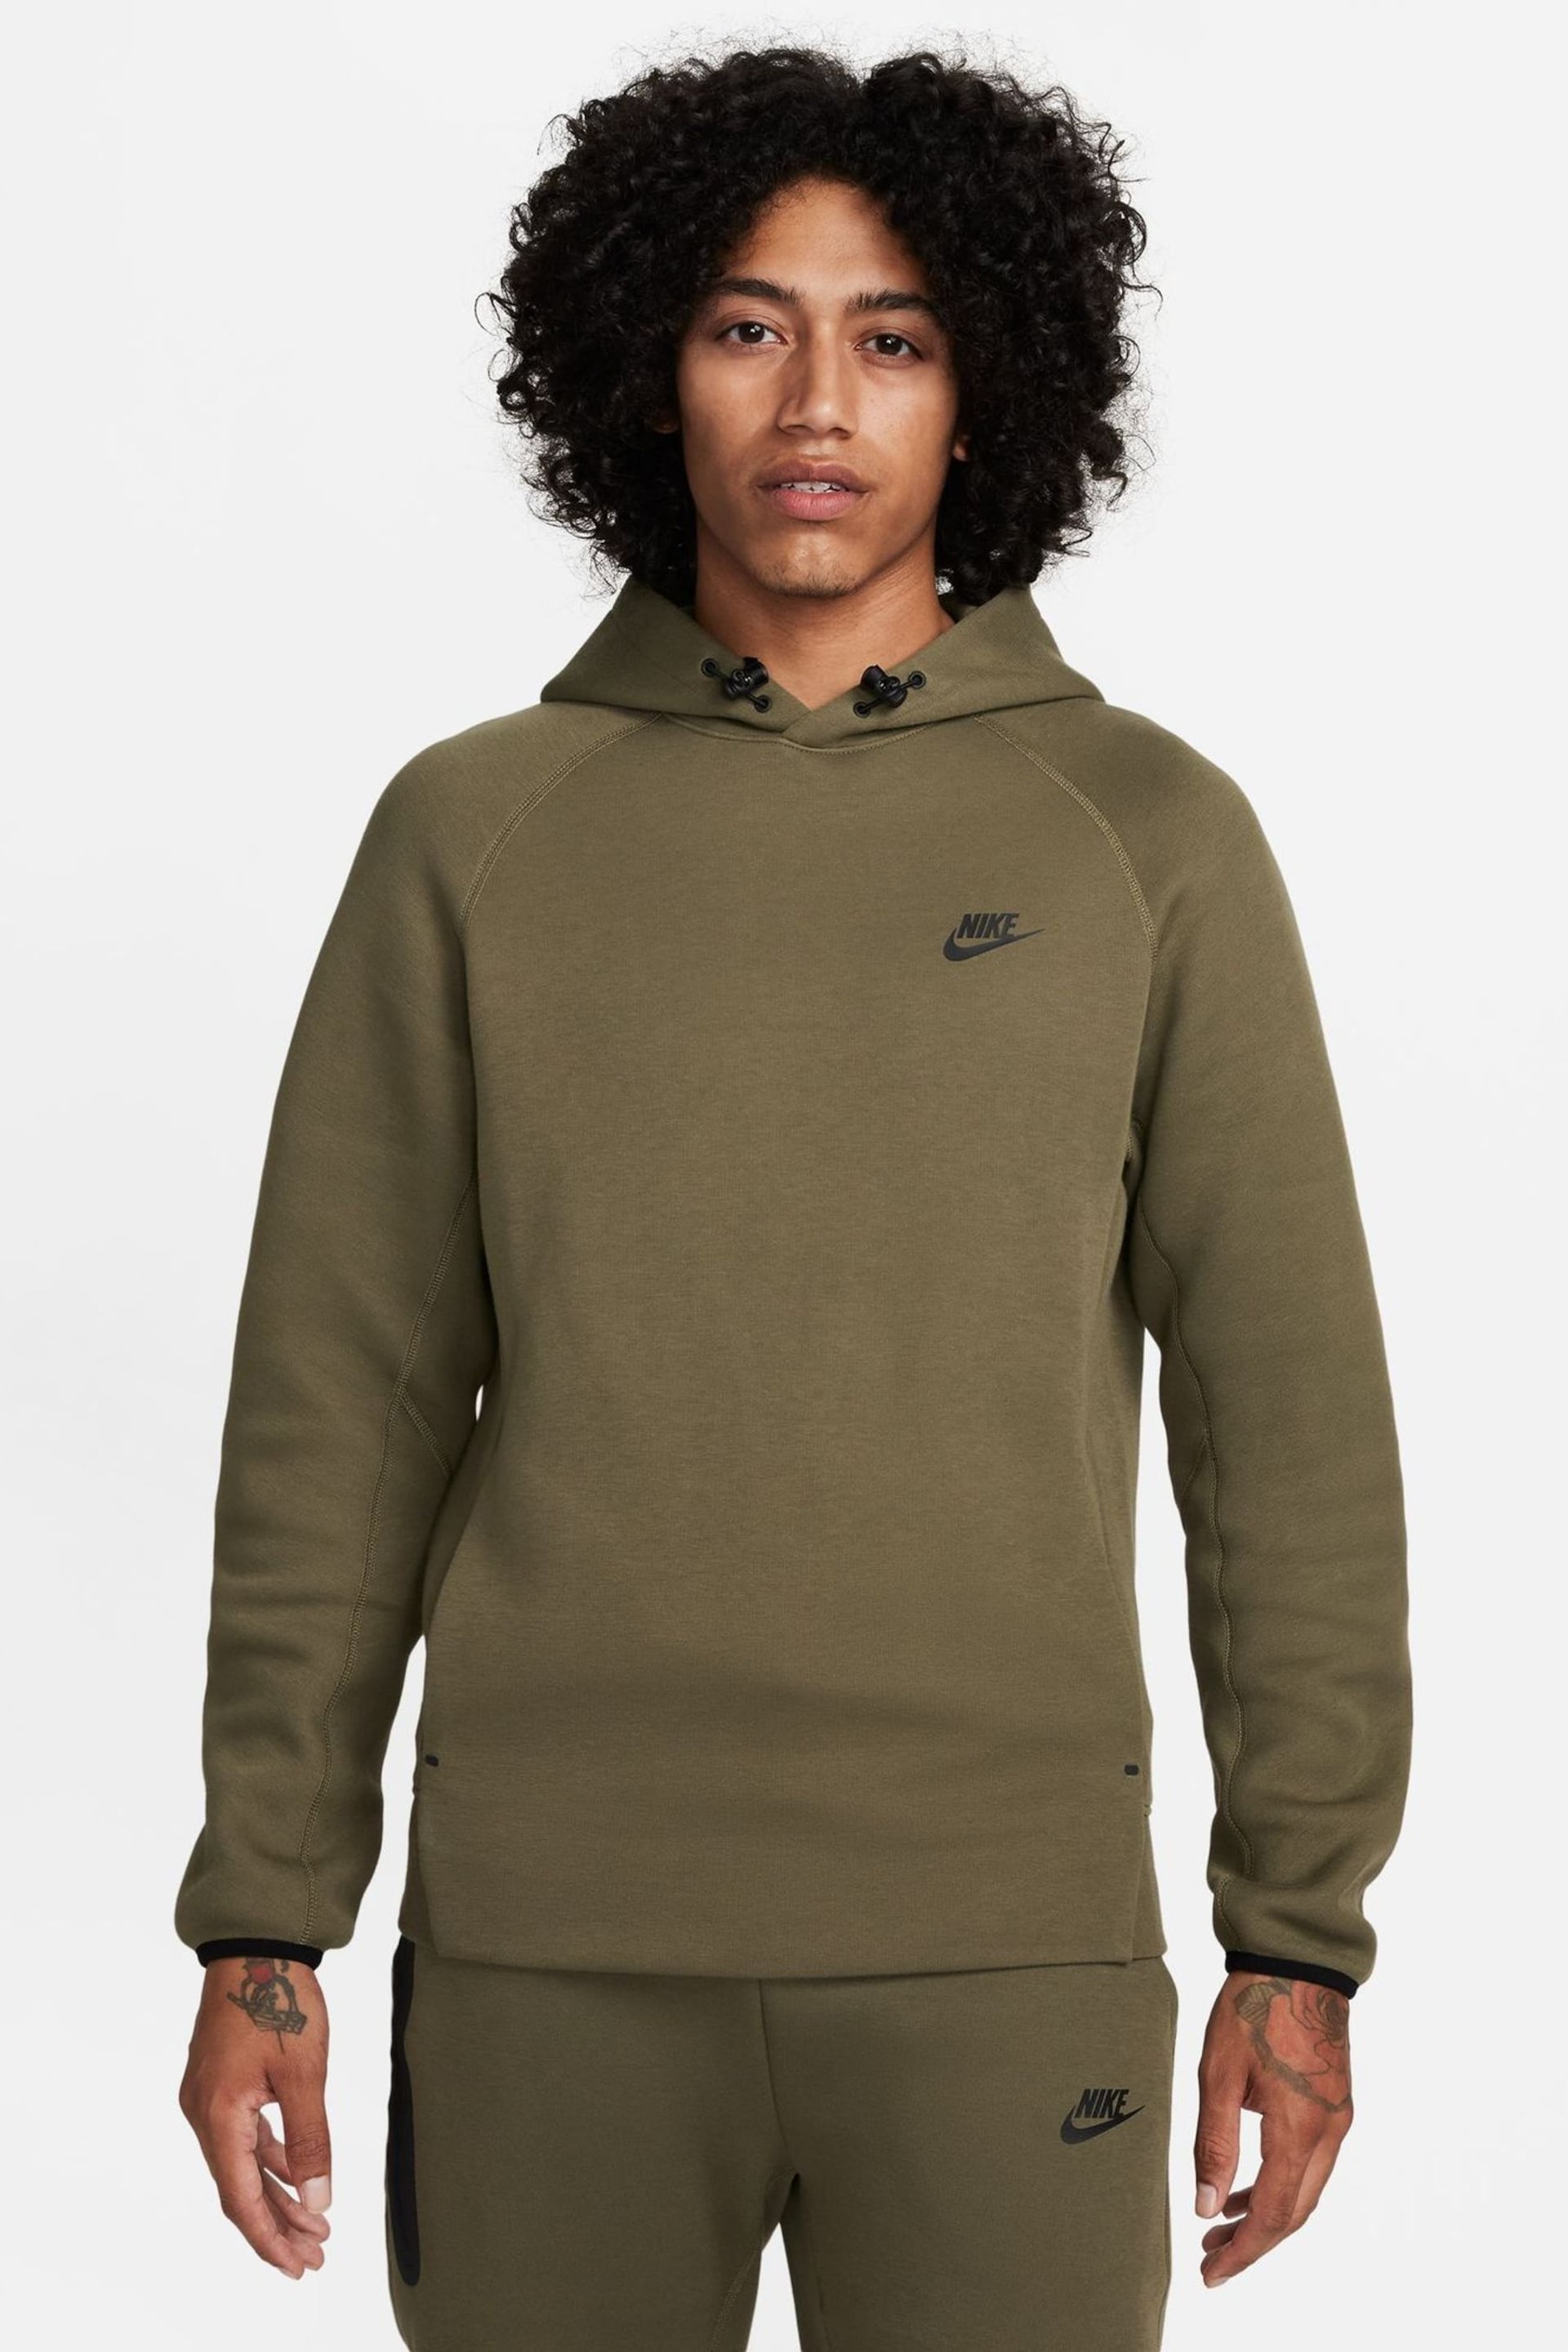 Nike Olive Green Tech Fleece Pullover Hoodie - Image 1 of 17